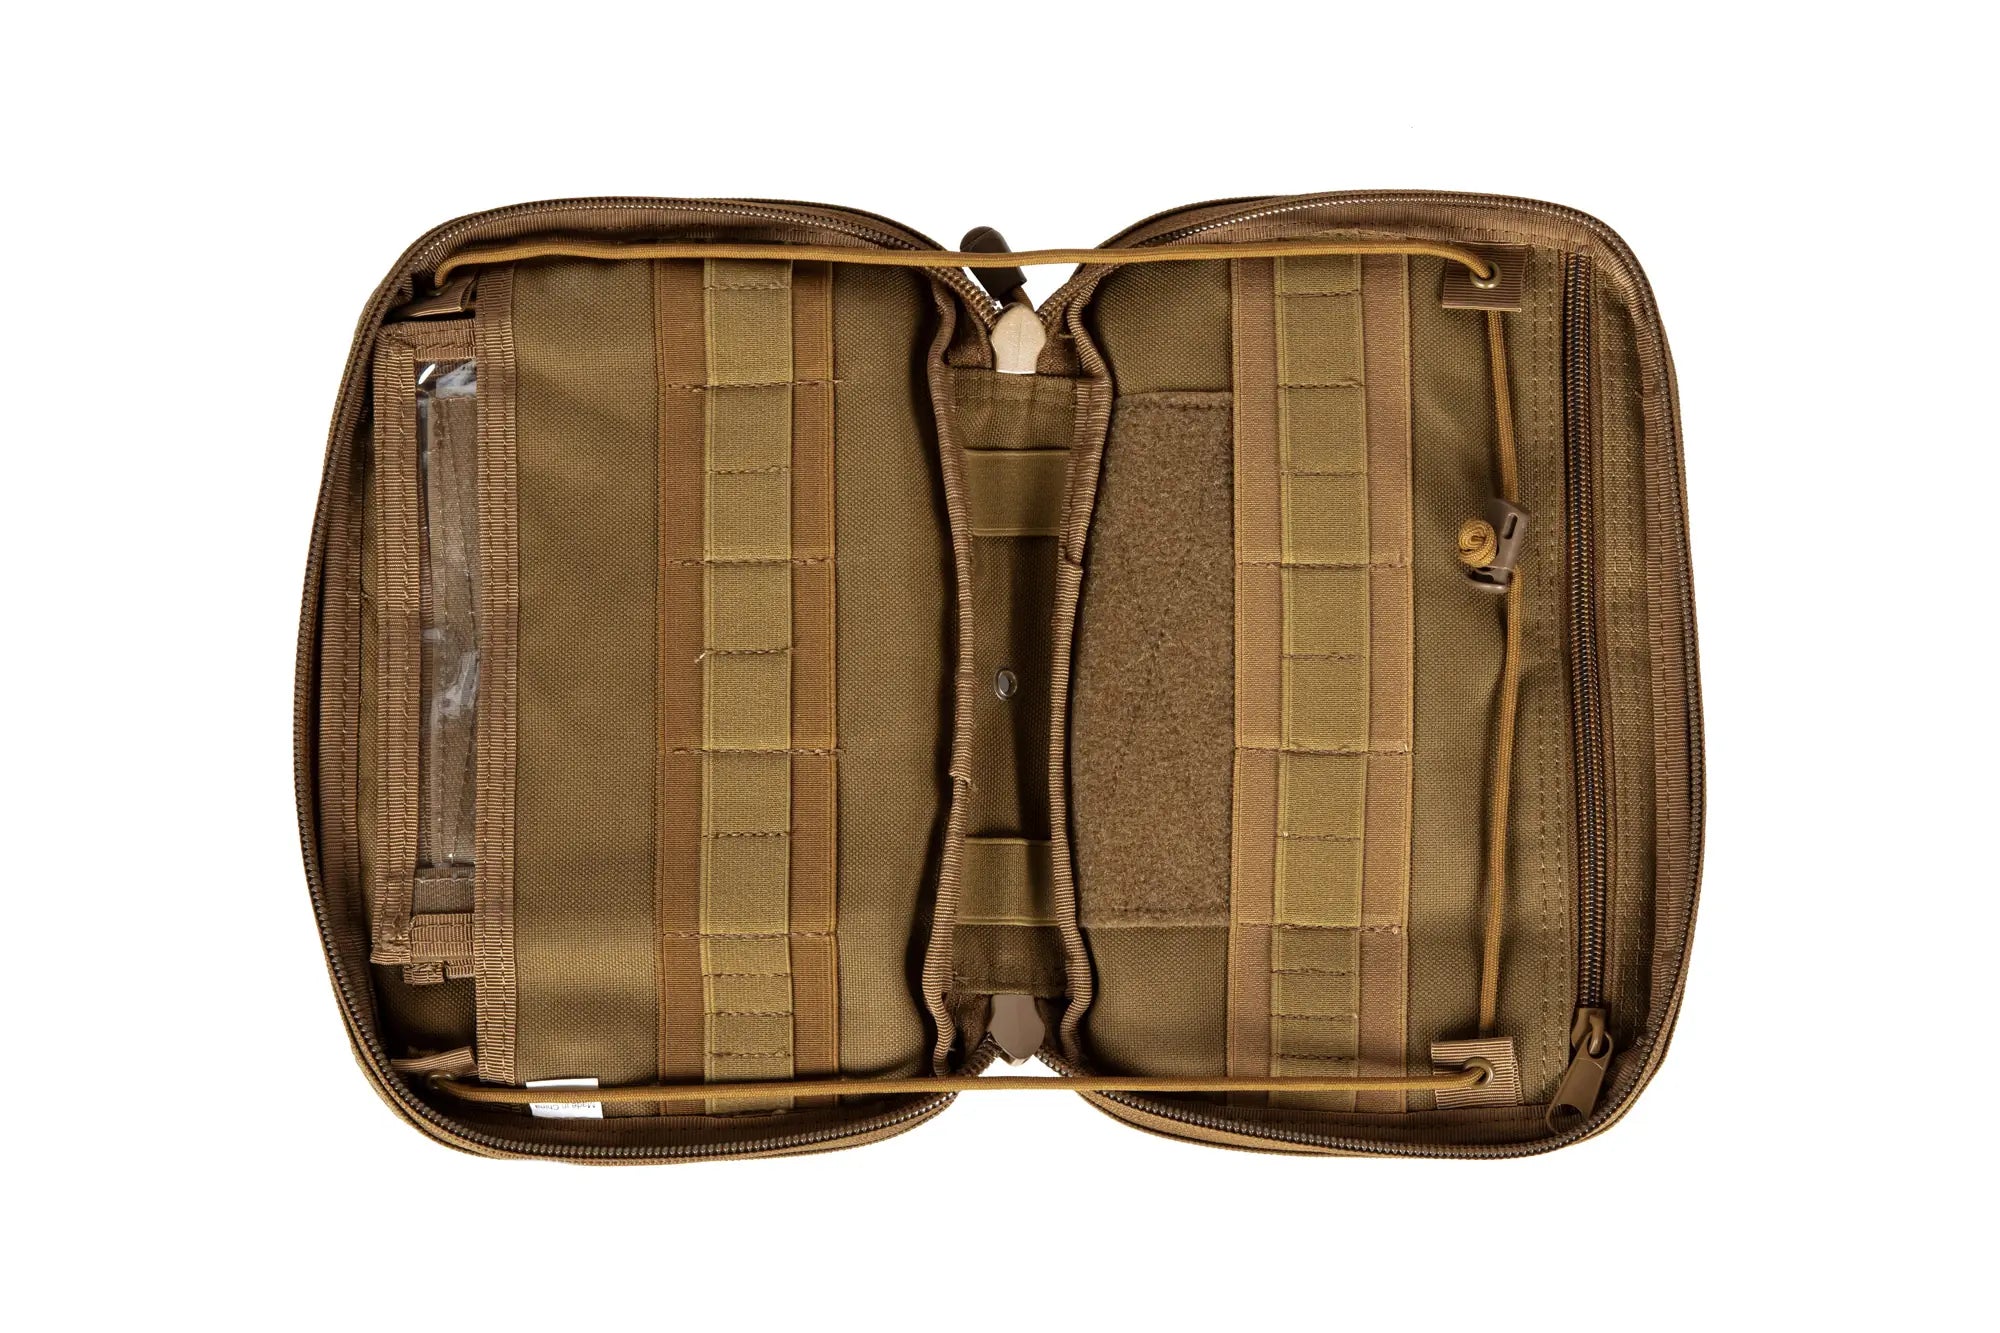 Large Administration Pouch with a Map Holder - Tan-6